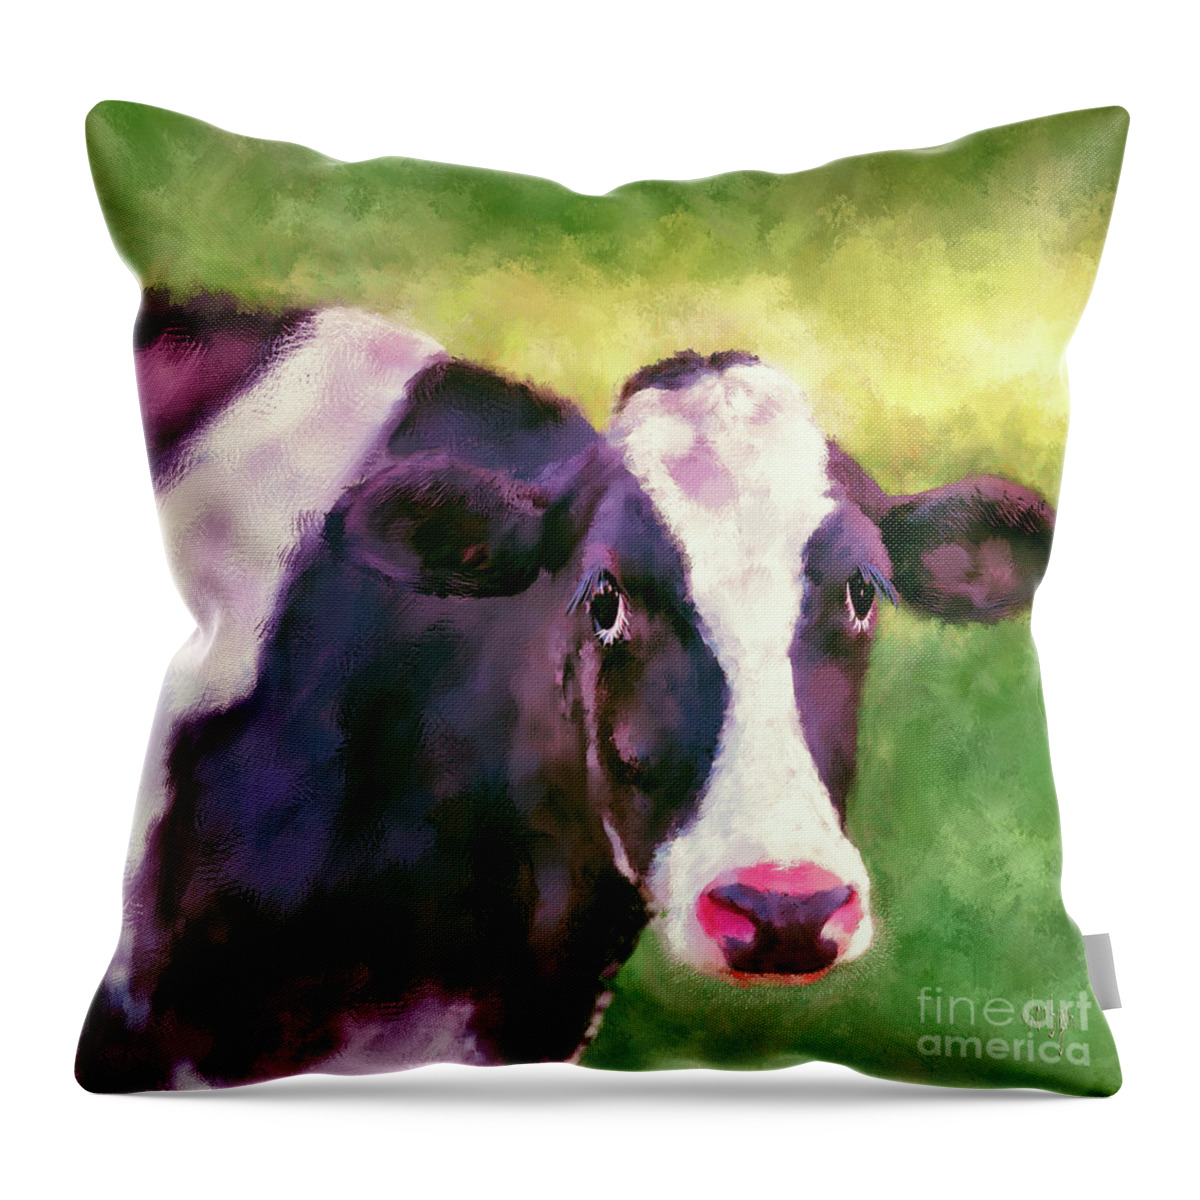 Animal Throw Pillow featuring the digital art Moo Cow by Lois Bryan